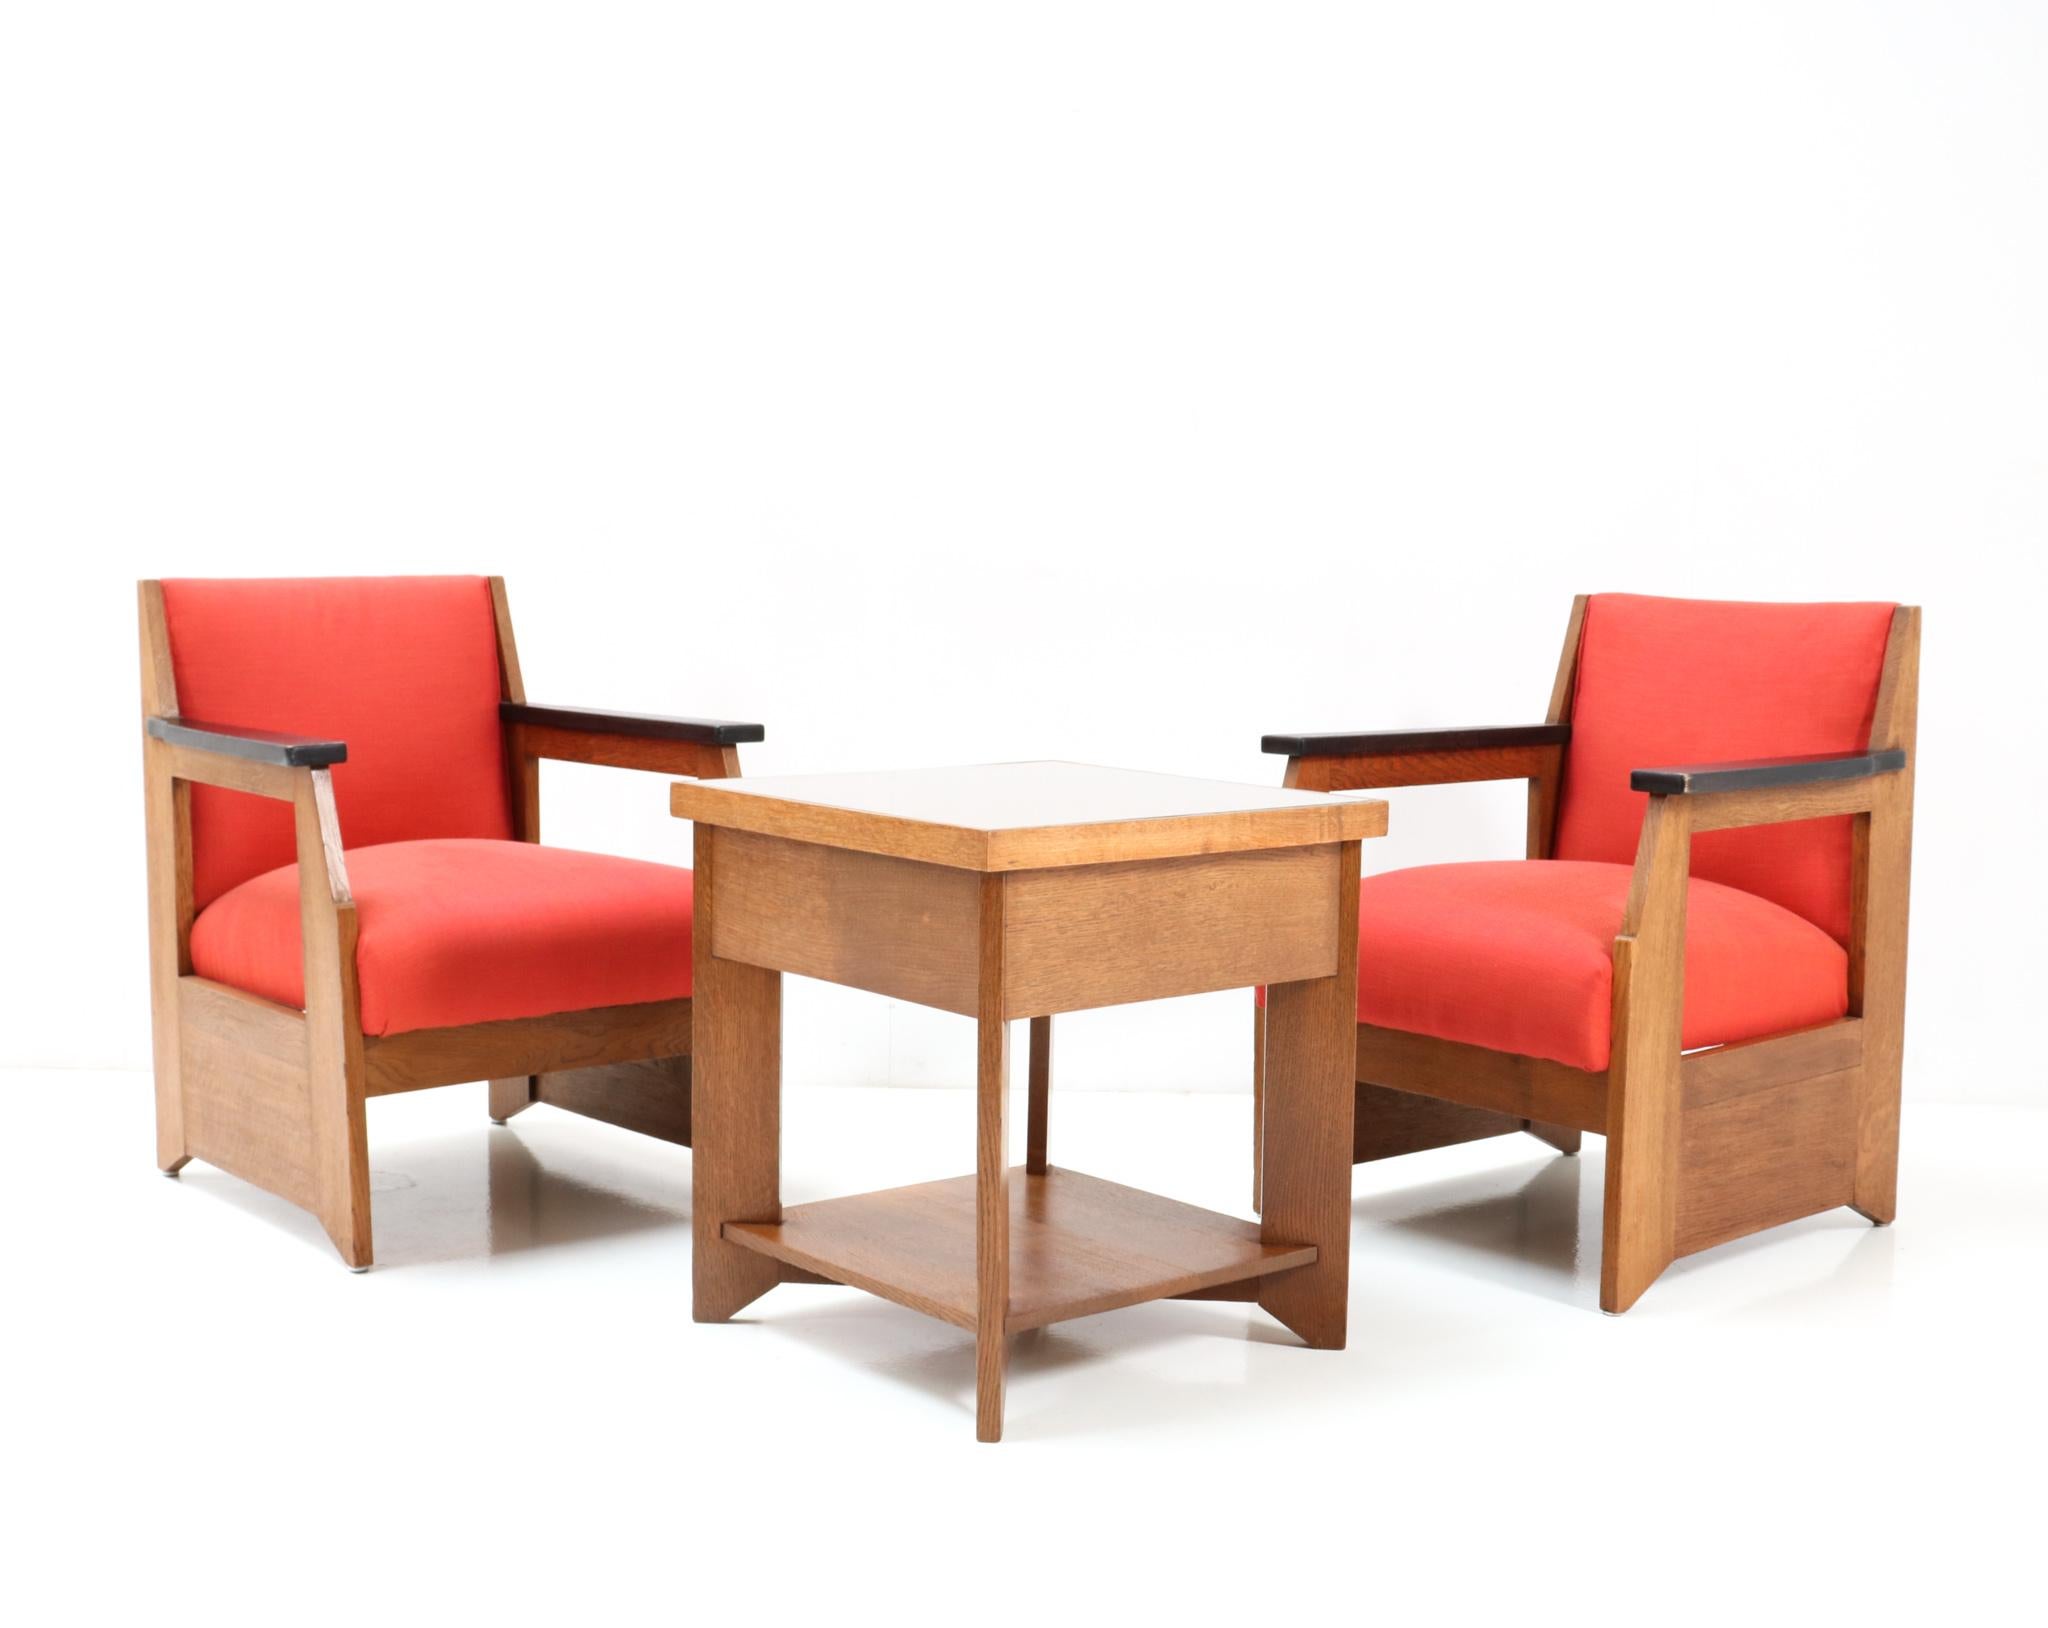 Magnificent and rare pair of Art Deco Modernist easy chairs.
Design by Hendrik Wouda for H. Pander & Zonen Den Haag.
Striking Dutch design from 1924.
Solid oak frames with original black lacquered armrests.
Re-upholstered with cotton